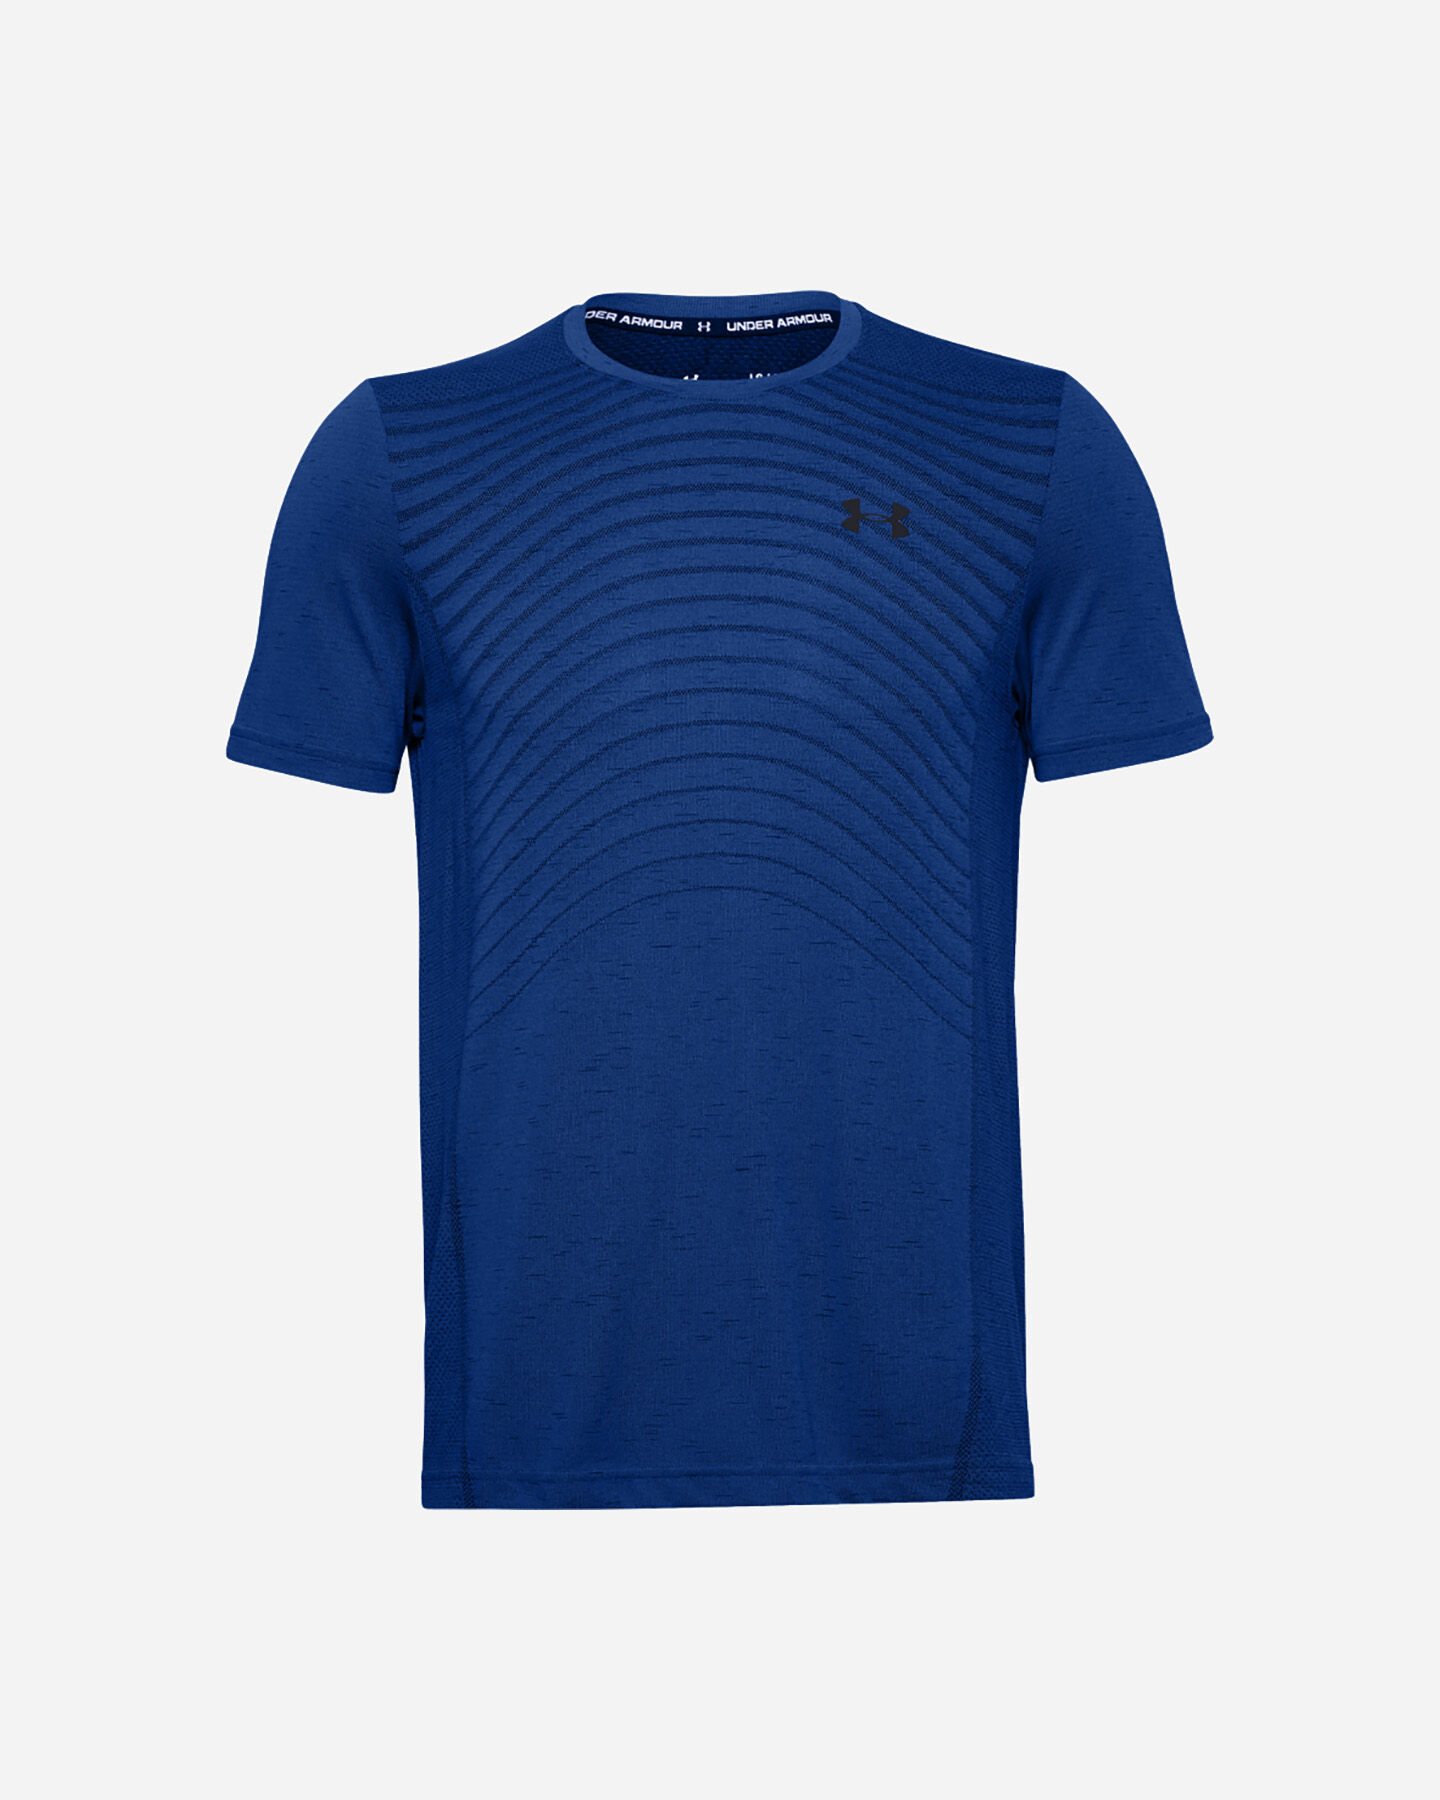  T-Shirt training UNDER ARMOUR SEAMLESS WAVE M S5228740|0400|SM scatto 0